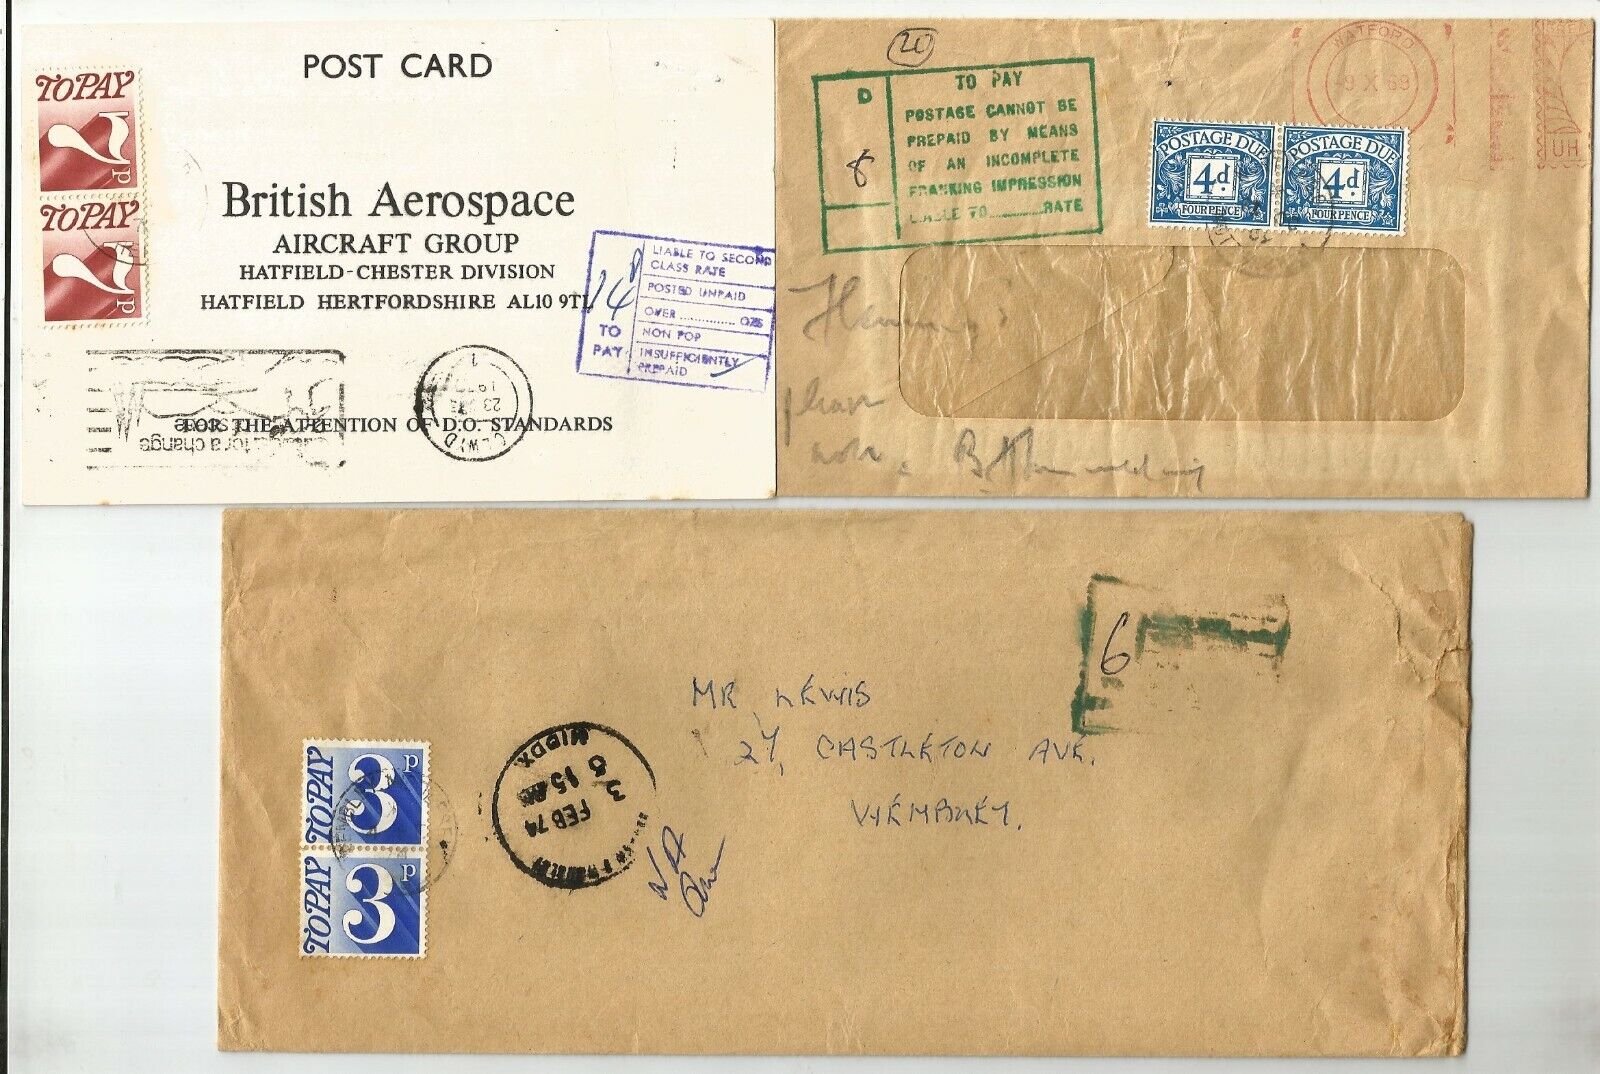 GB 5 covers 1961-76 Postage Due stamps, Posted Unpaid, To Pay and other marks on